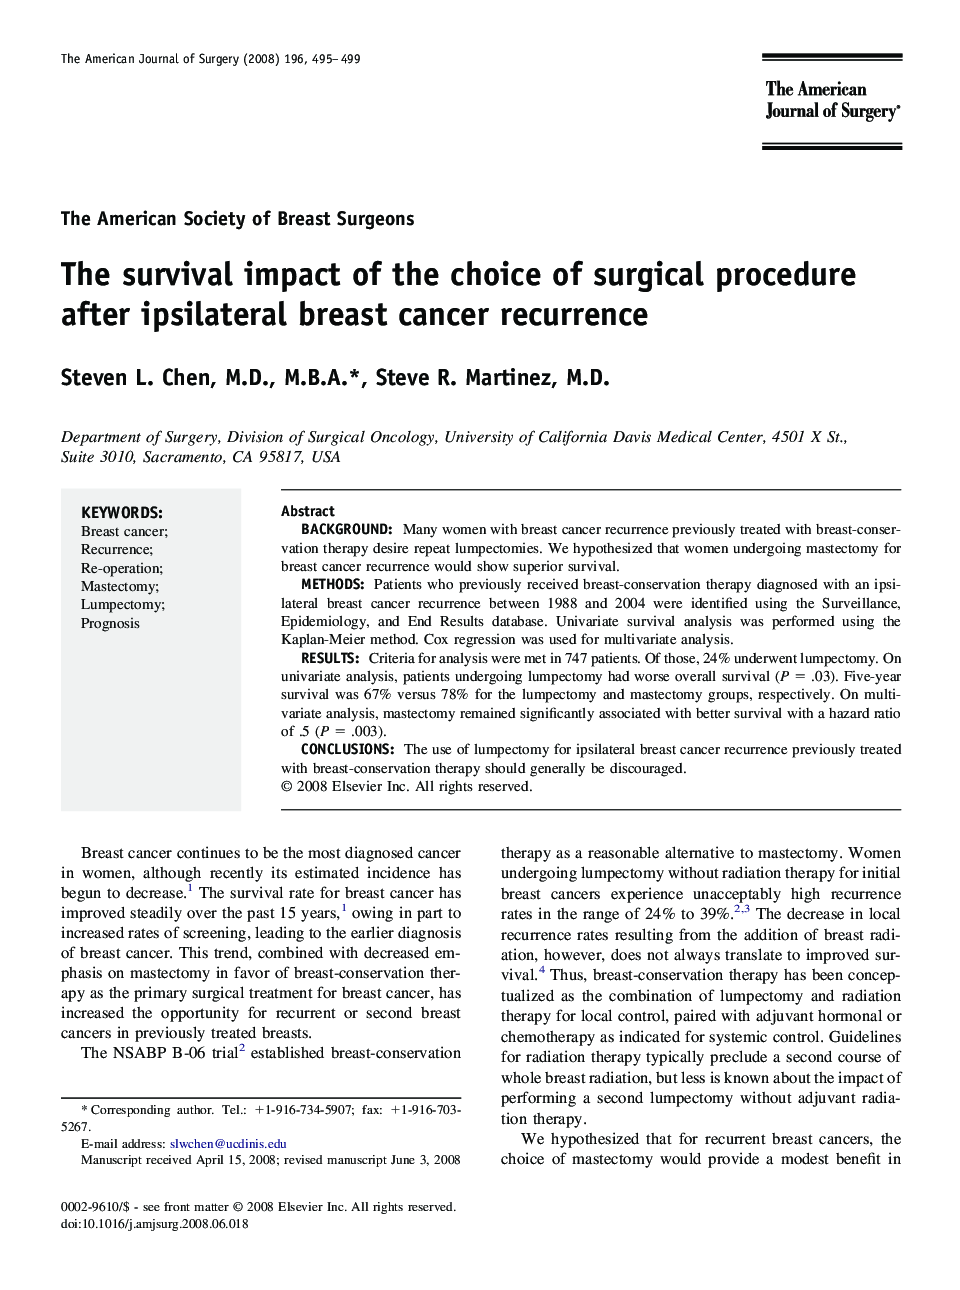 The survival impact of the choice of surgical procedure after ipsilateral breast cancer recurrence